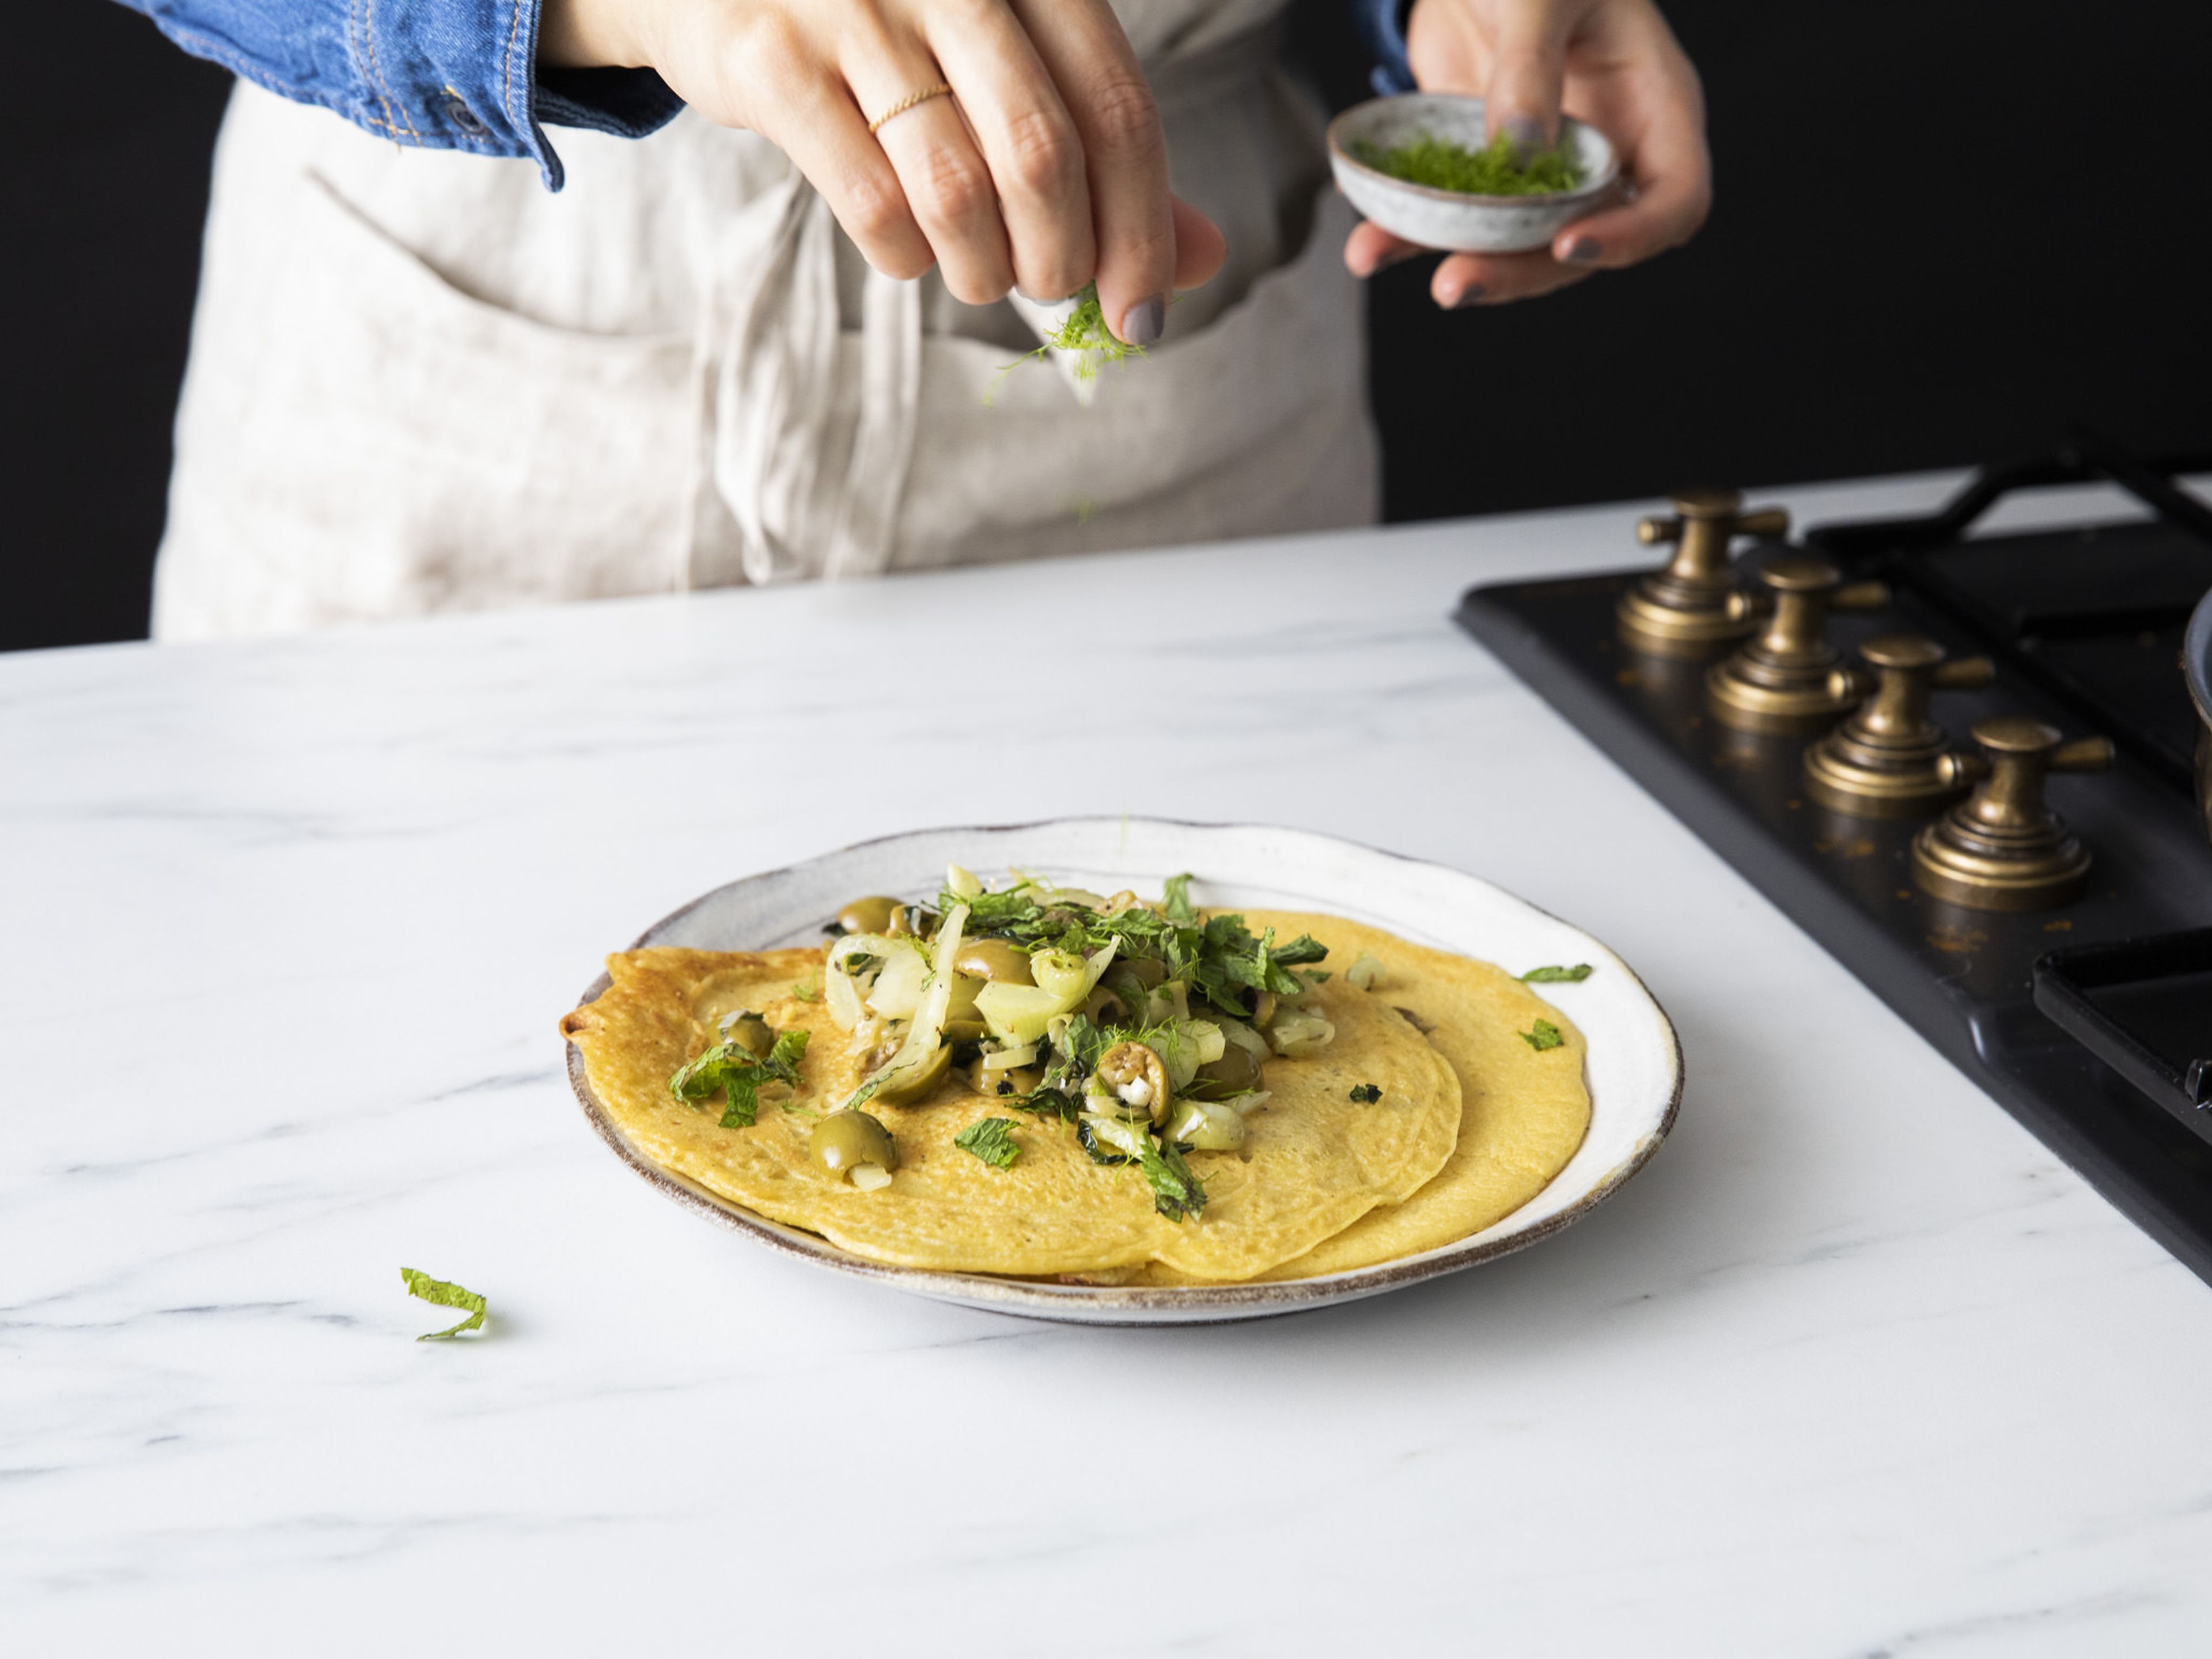 Top each pancake with half the fennel and olive mixture, mint, and any fennel fronds. Enjoy!